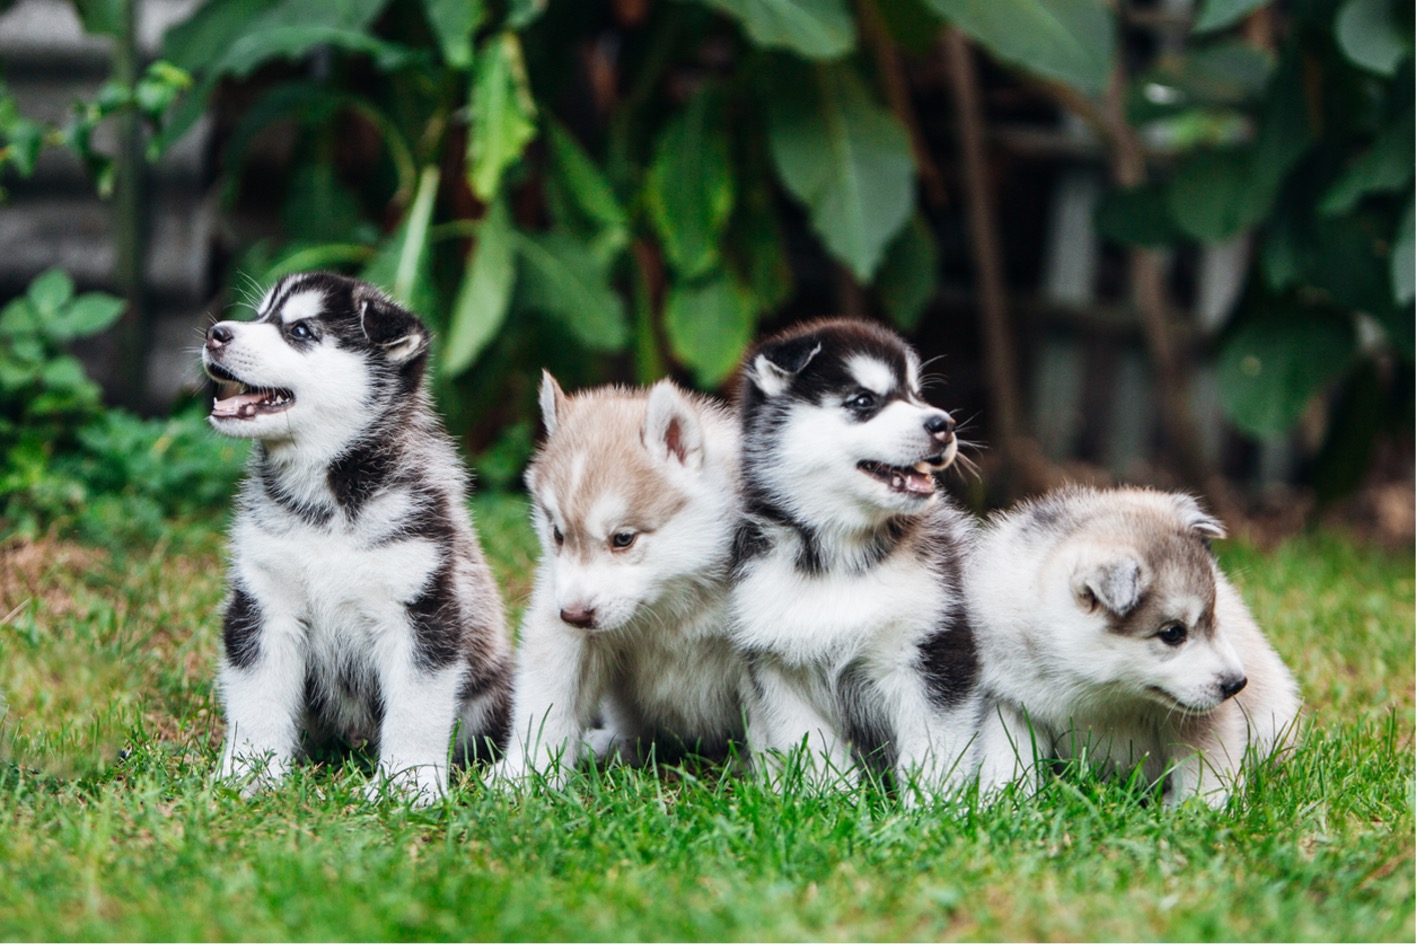 A group of puppies in the grass, Preventing and Treating Parvo in Puppies